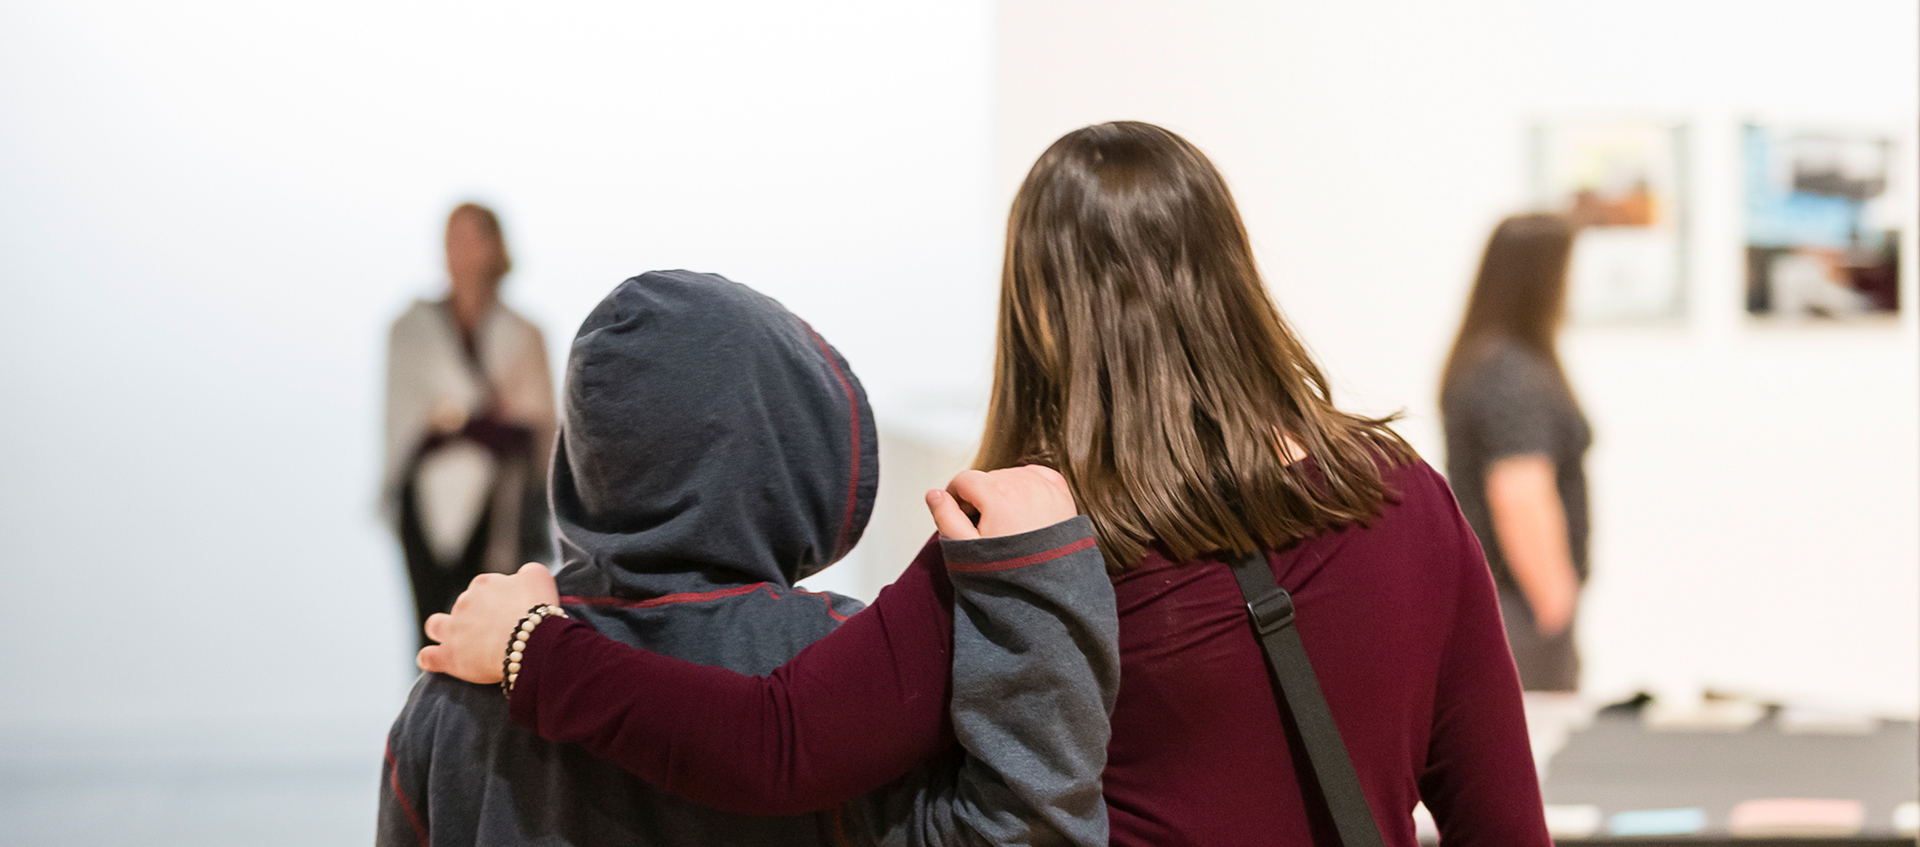 Two people viewed from behind stand in the galleries with their arms around each other. Two artworks hang on a white wall in the blurred background.